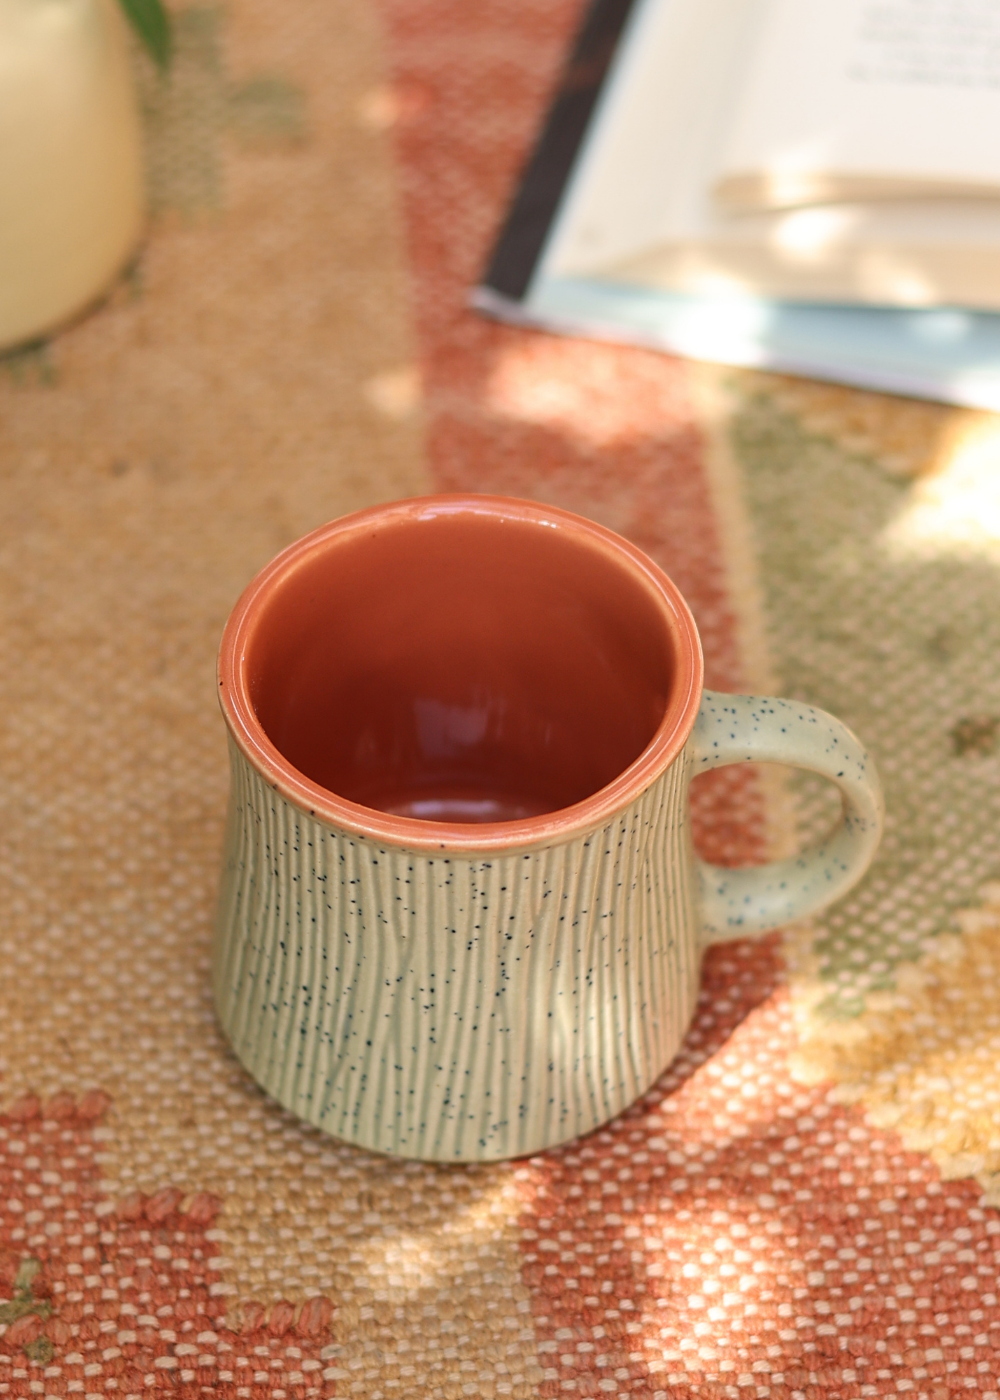 Top shot of olive etching cup 